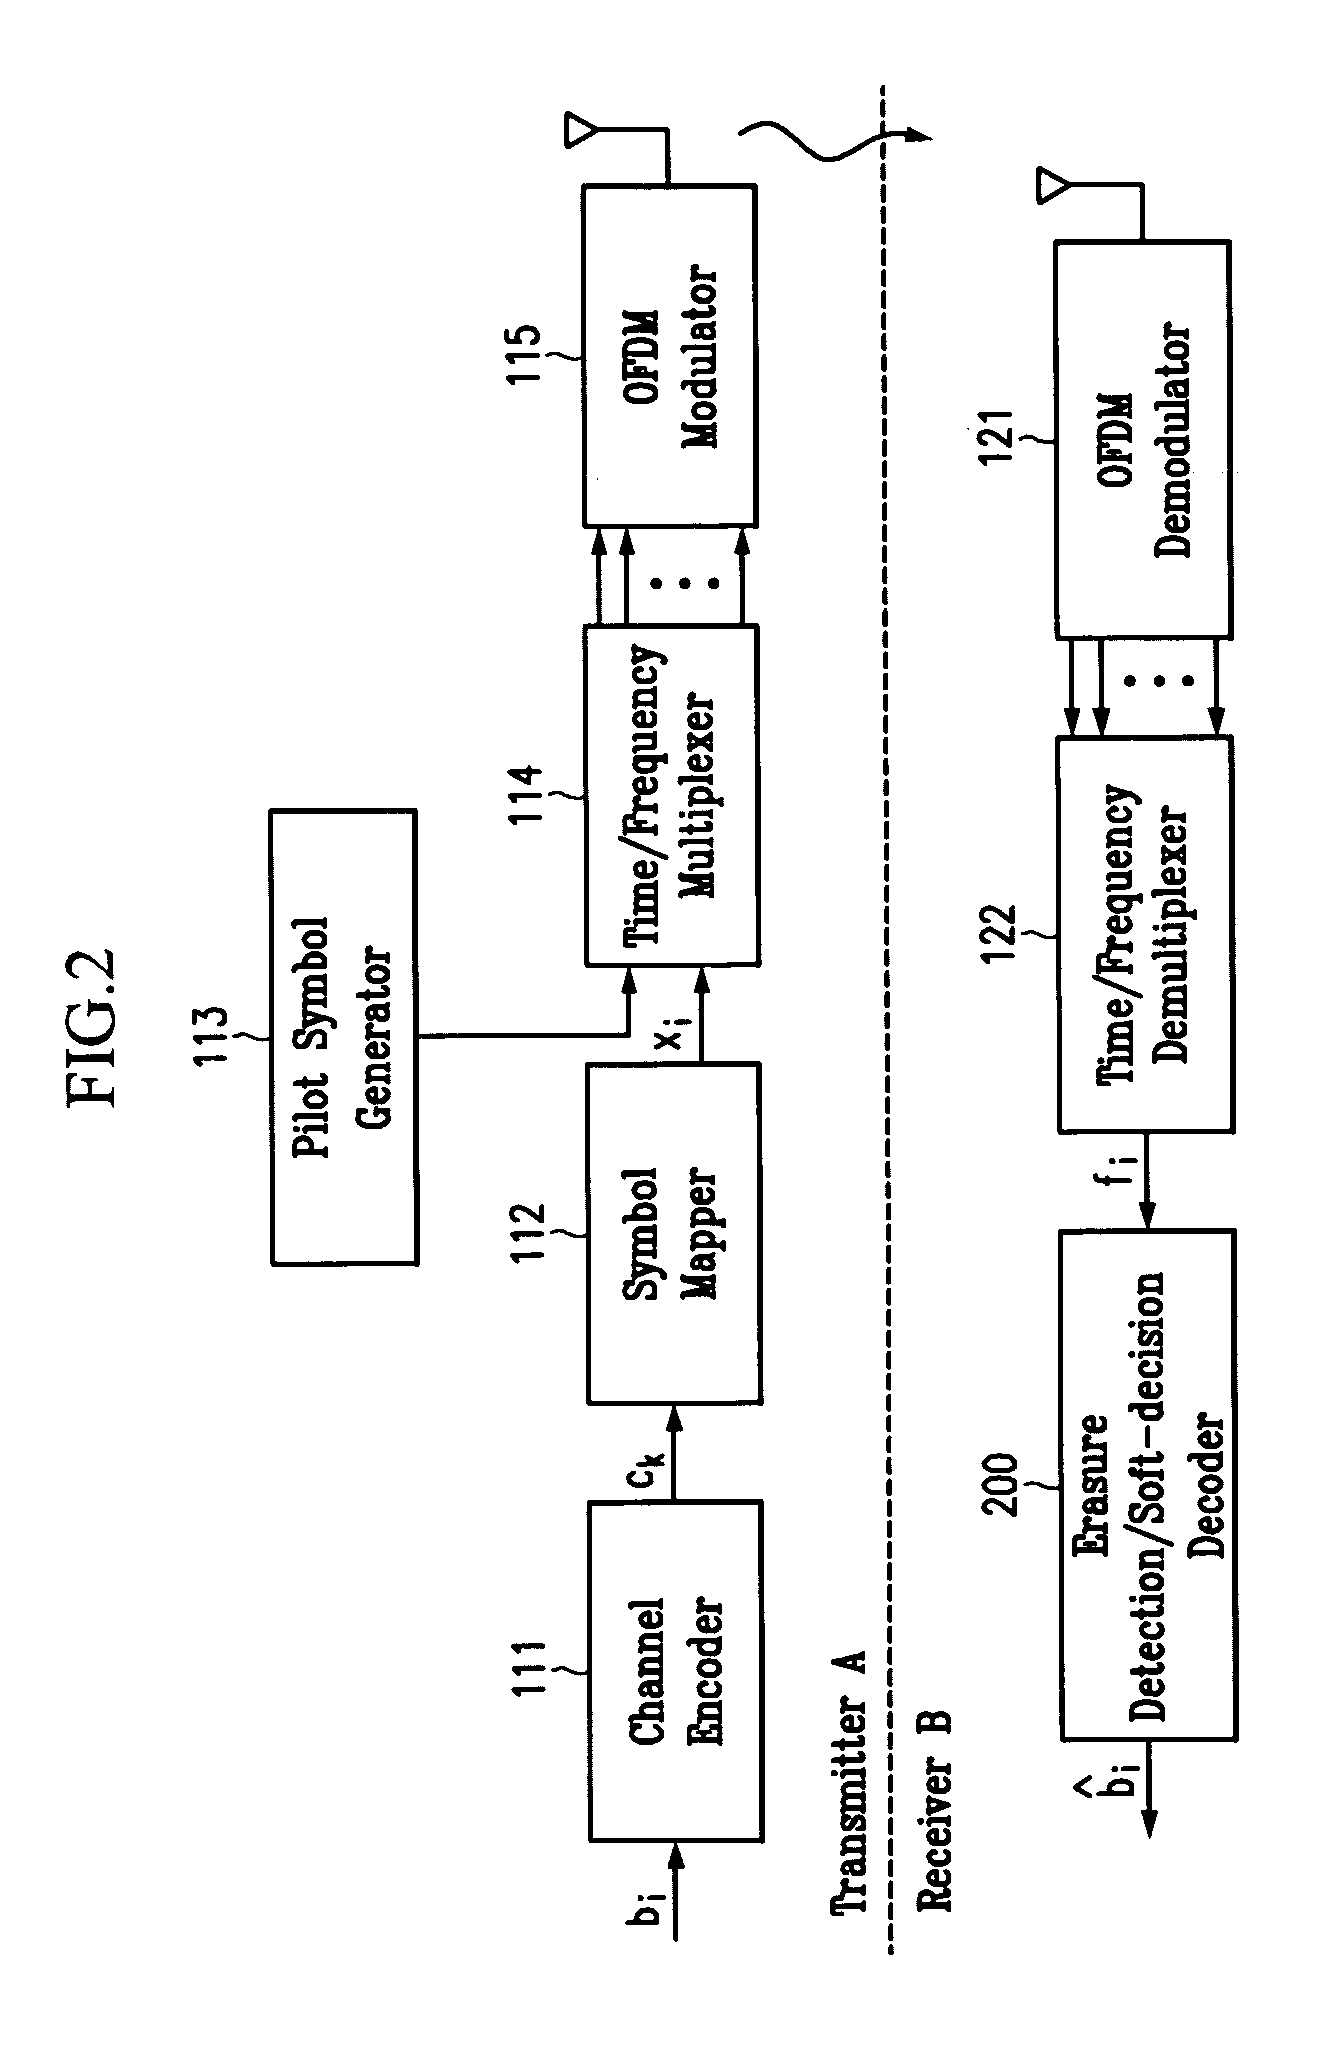 Apparatus and method for erasure detection and soft-decision decoding in cellular system receiver